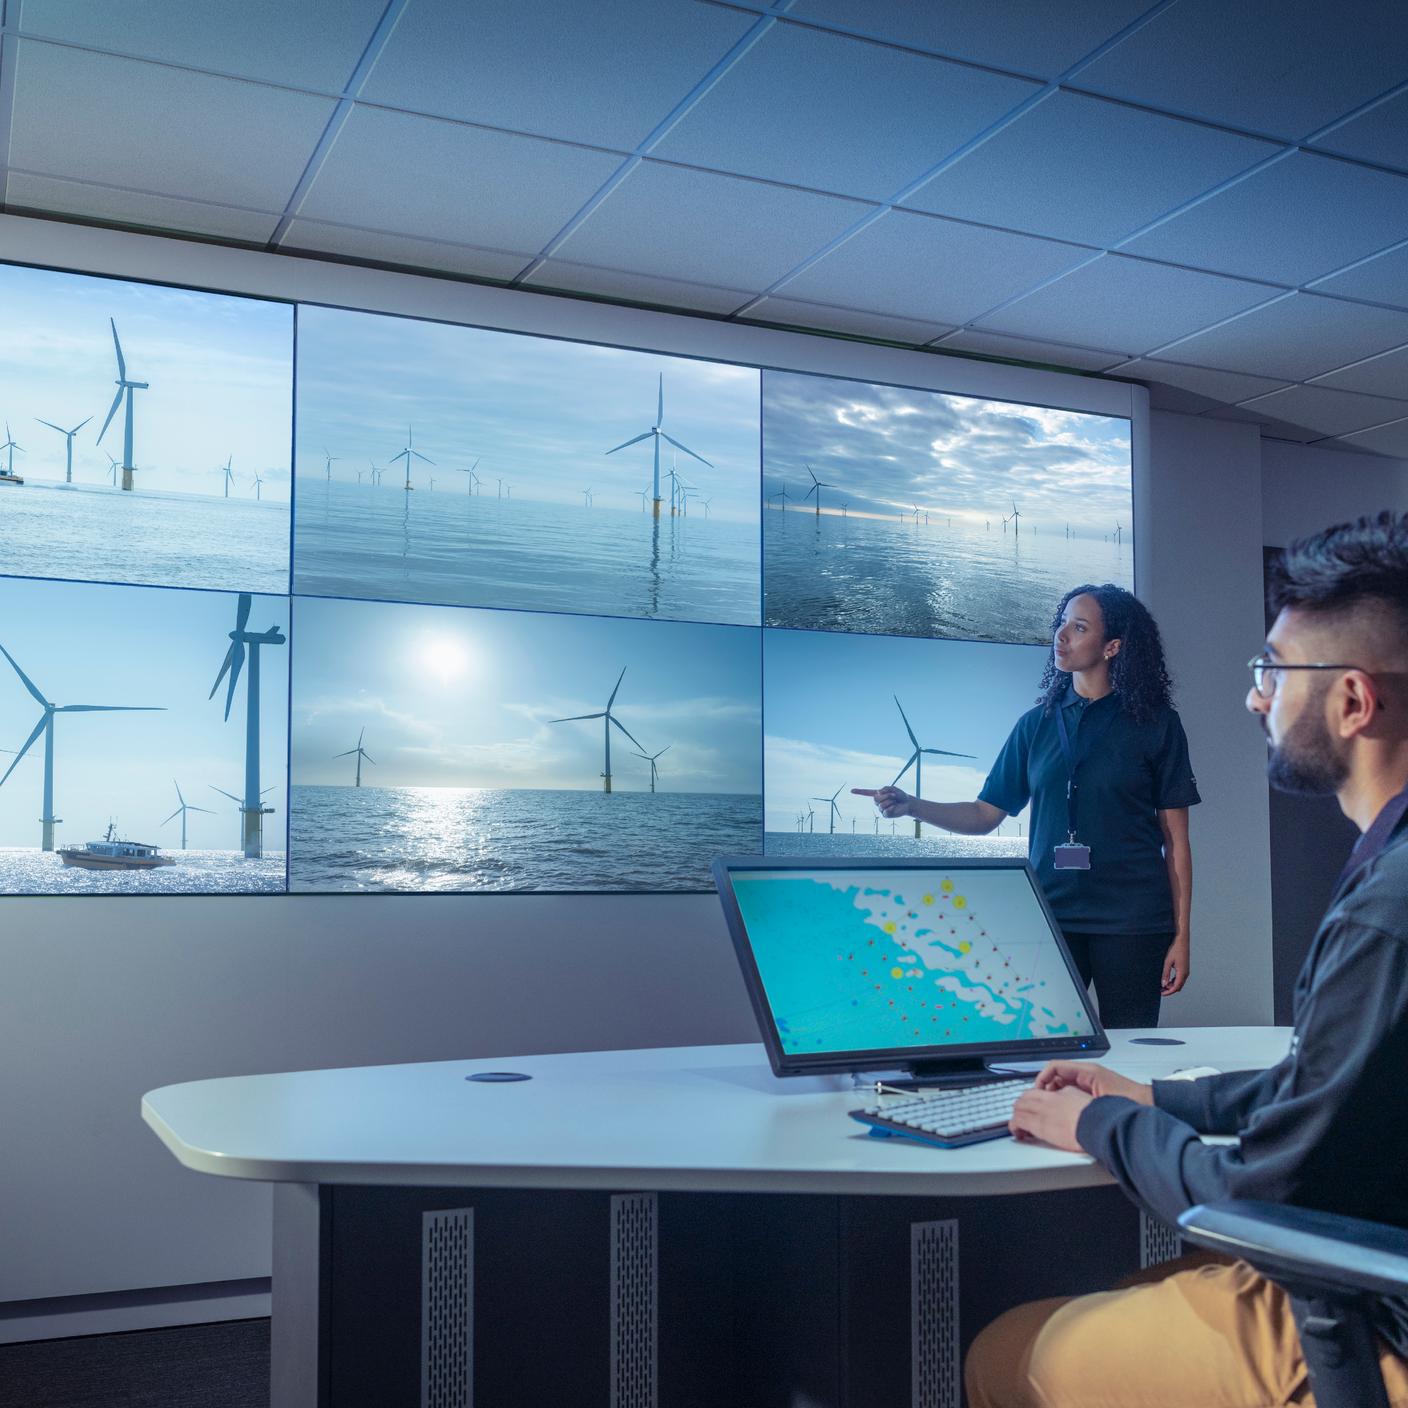 BS EN ISO 50005 - UK, York, Male and female operators in offshore wind farm control room